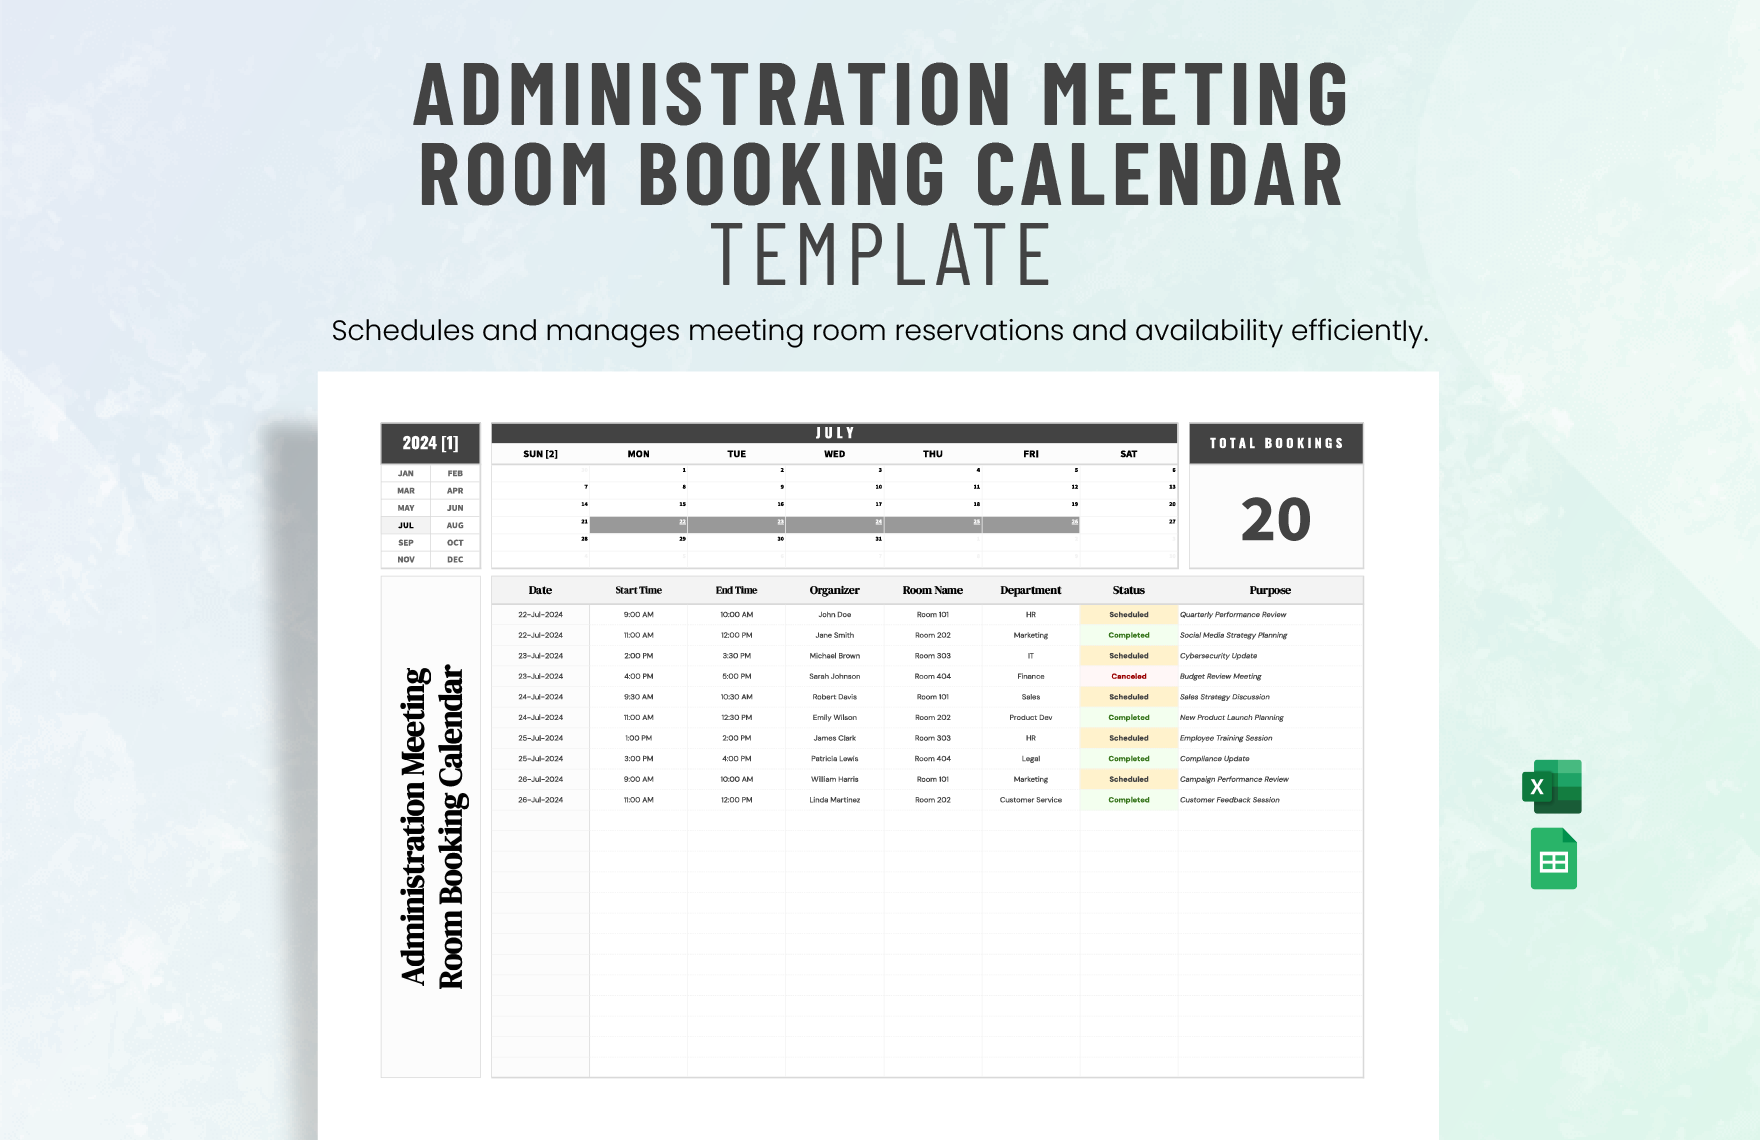 Administration Meeting Room Booking Calendar Template in Excel, Google Sheets